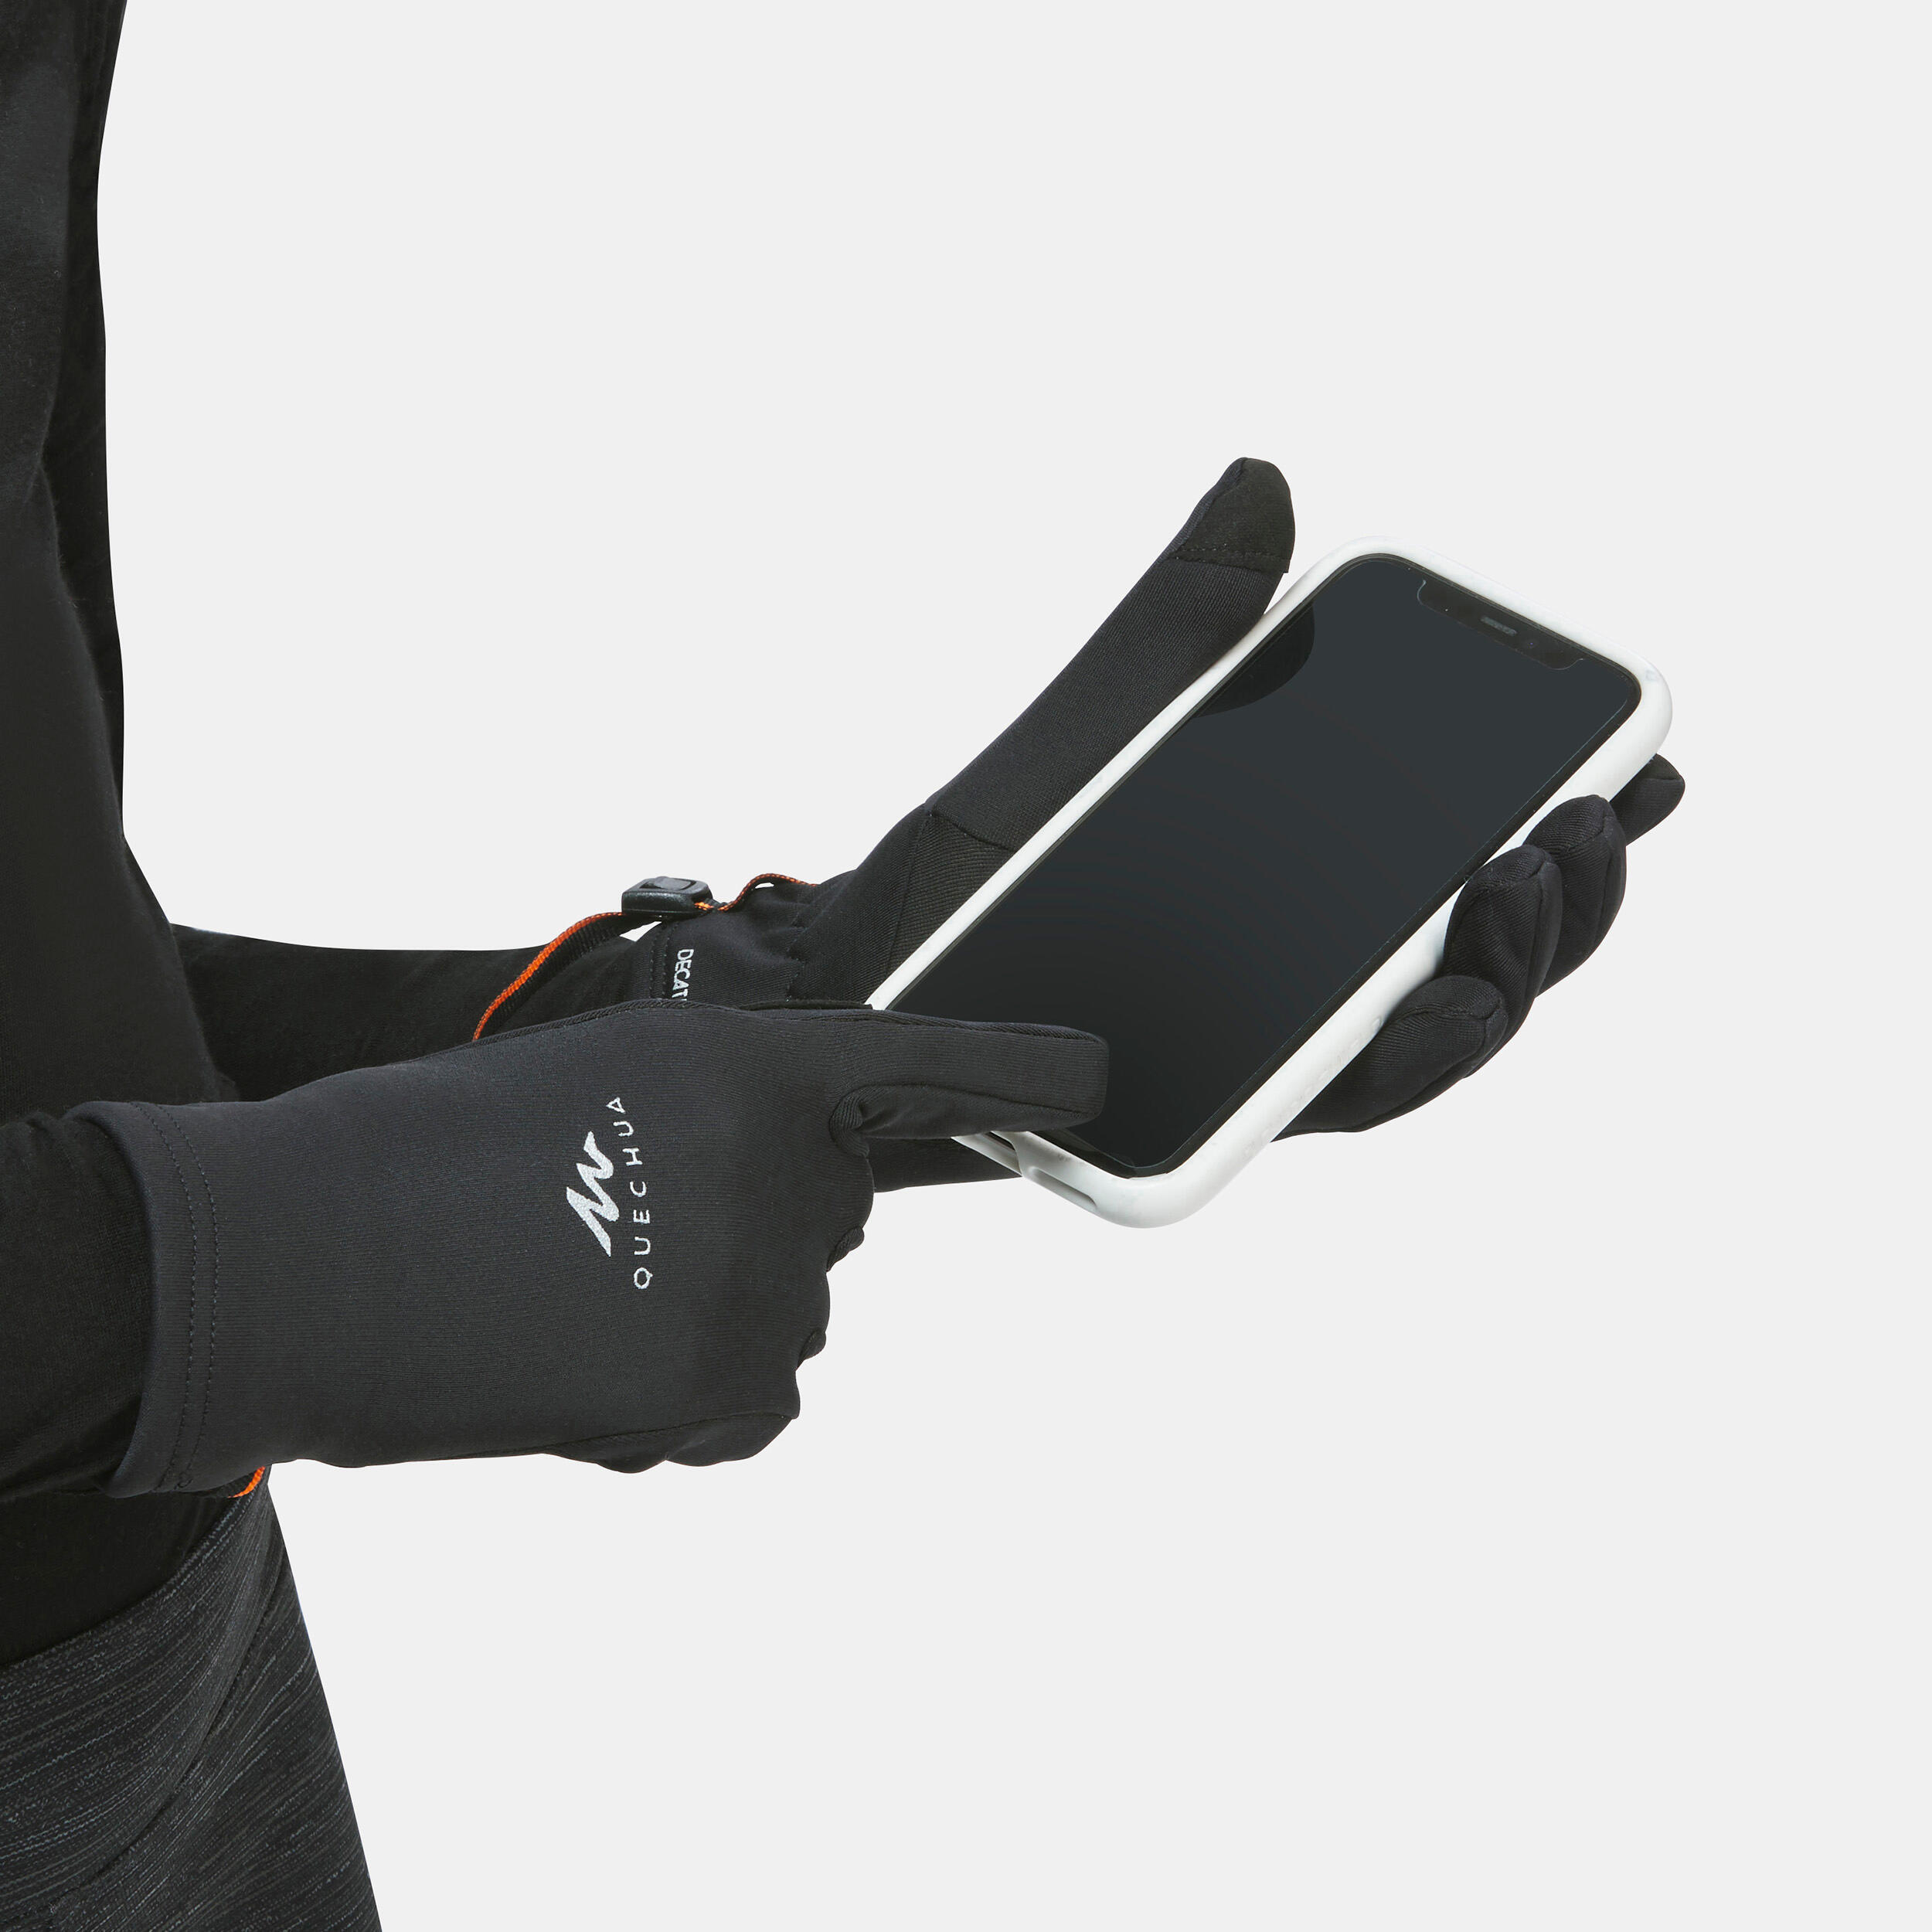 KIDS' HIKING TOUCHSCREEN COMPATIBLE GLOVES - SH500 MOUNTAIN STRETCH - AGE 6-14 5/7